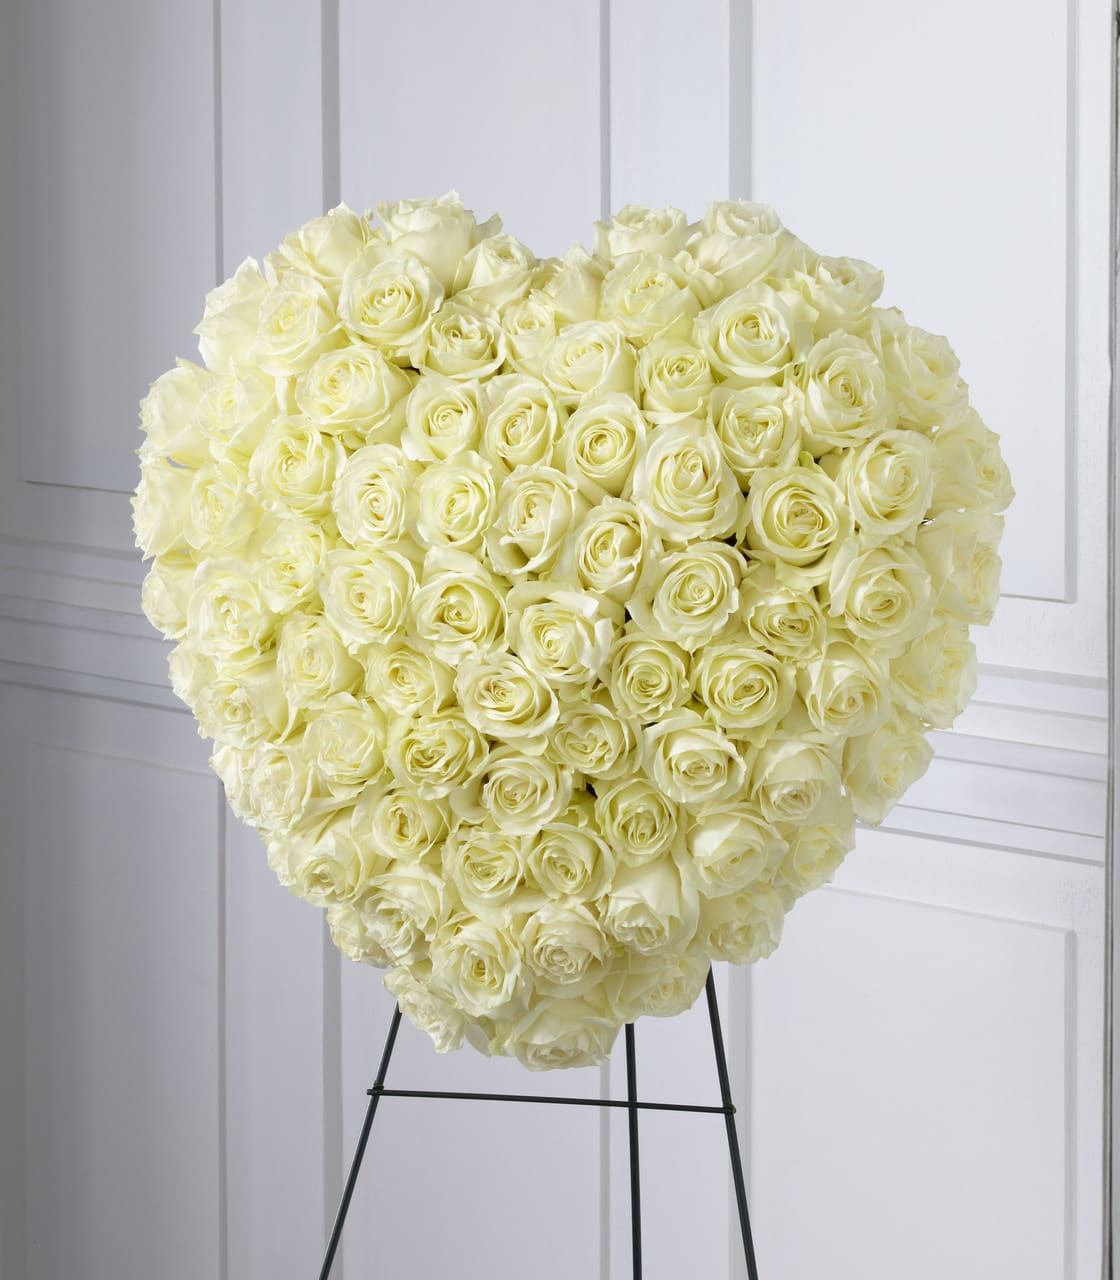 SAFF The Elegant Remembrance Standing Heart - The Elegant Remembrance Standing Heart is an exquisite display of peace and love. 77 Stems of white roses are artfully arranged in the shape of a heart and presented on a wire easel, creating a simply beautiful tribute for their final farewell service. Approximately 24&quot;H x 22&quot;W.  Your purchase includes a complimentary personalized gift message.